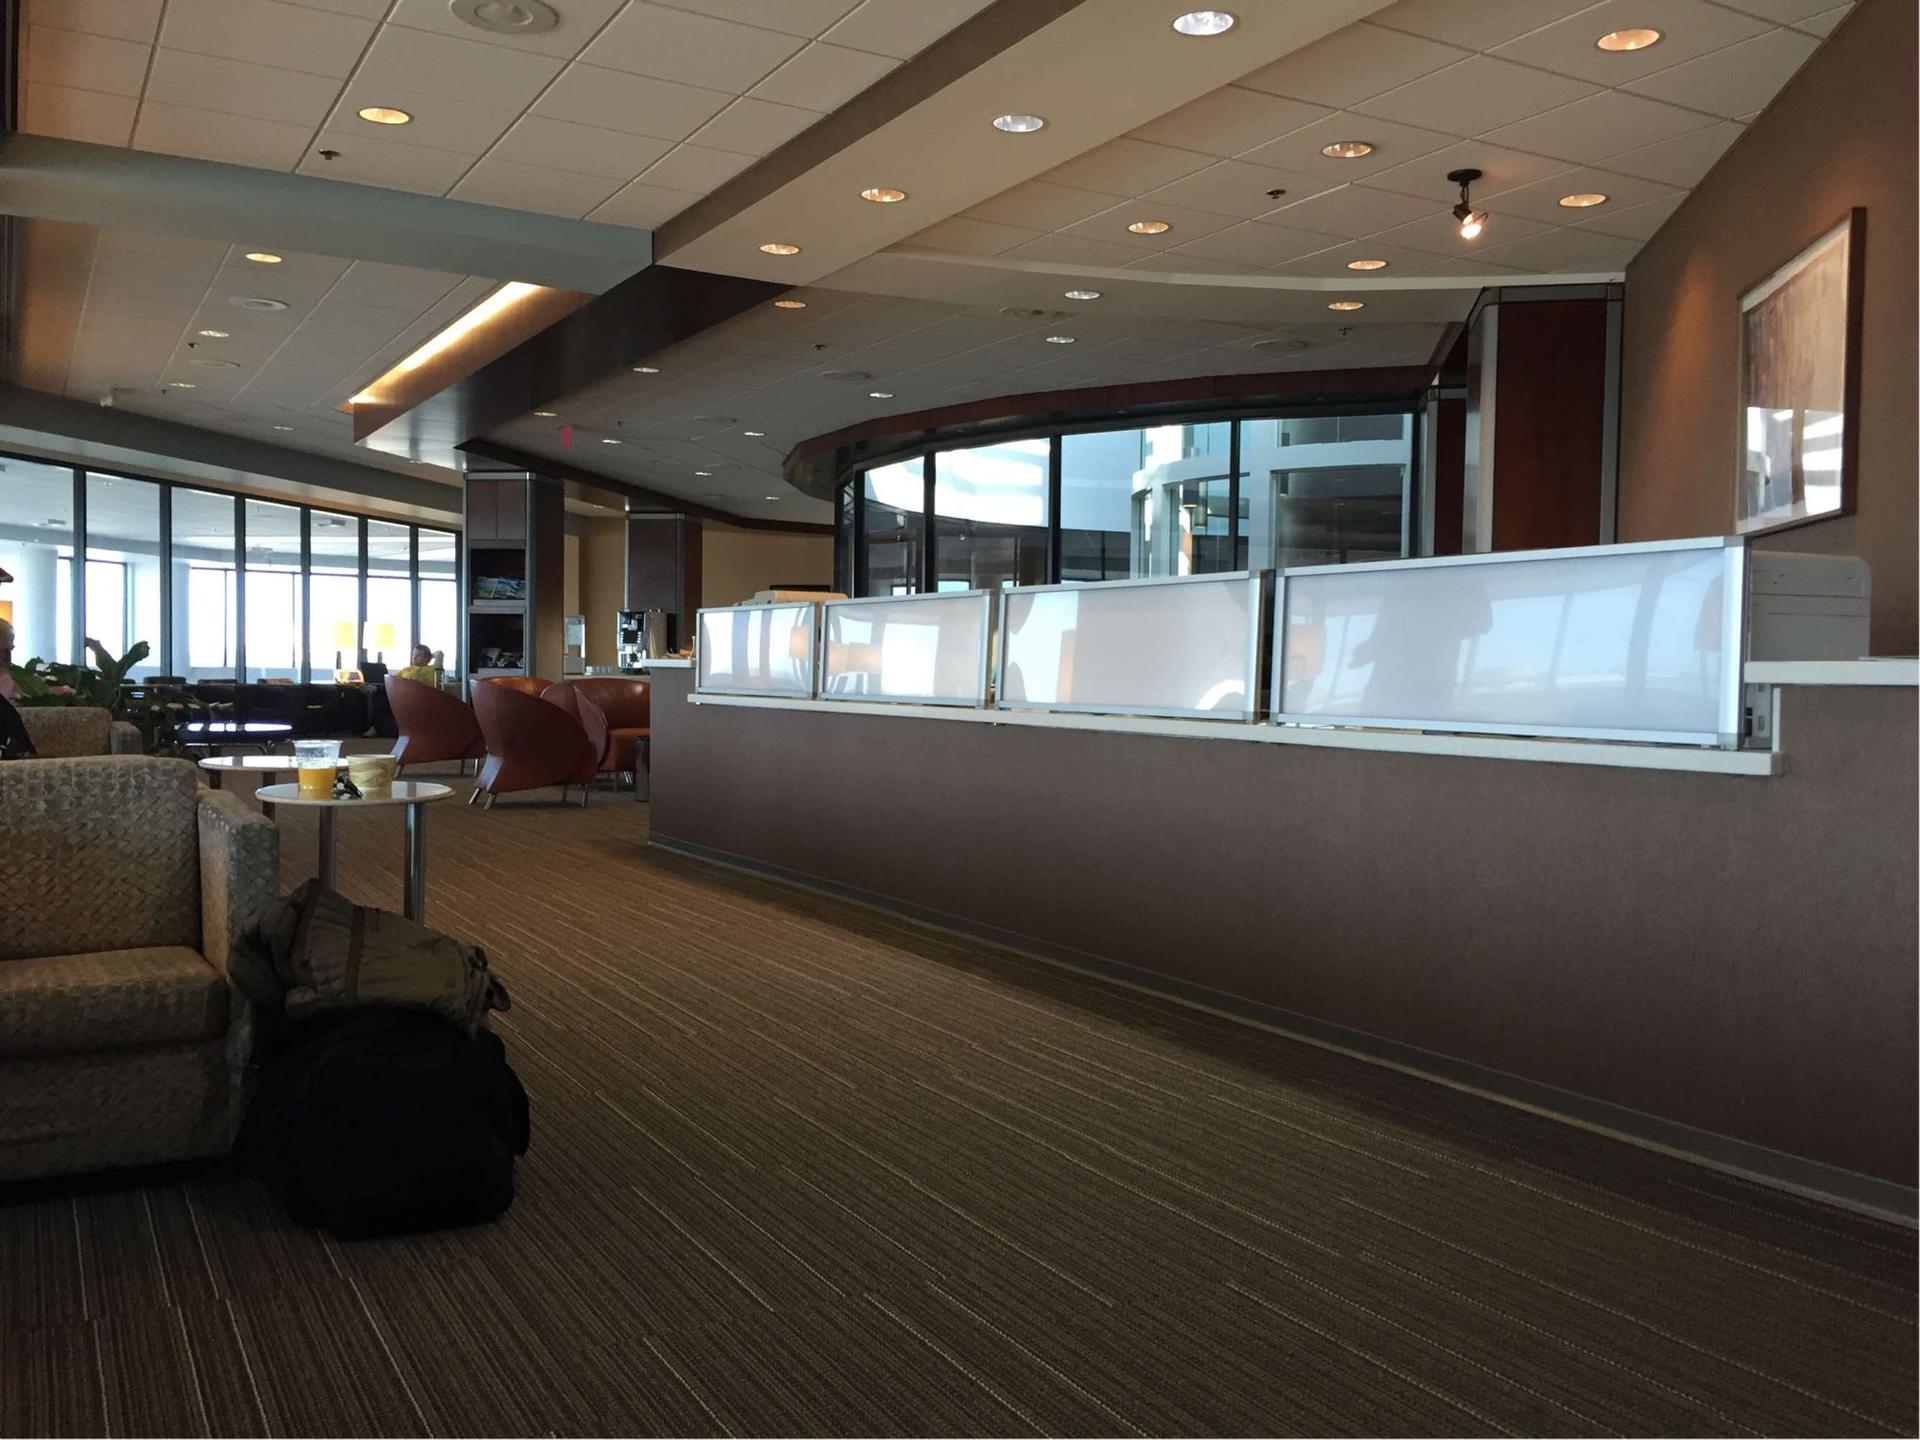 American Airlines Admirals Club image 14 of 16